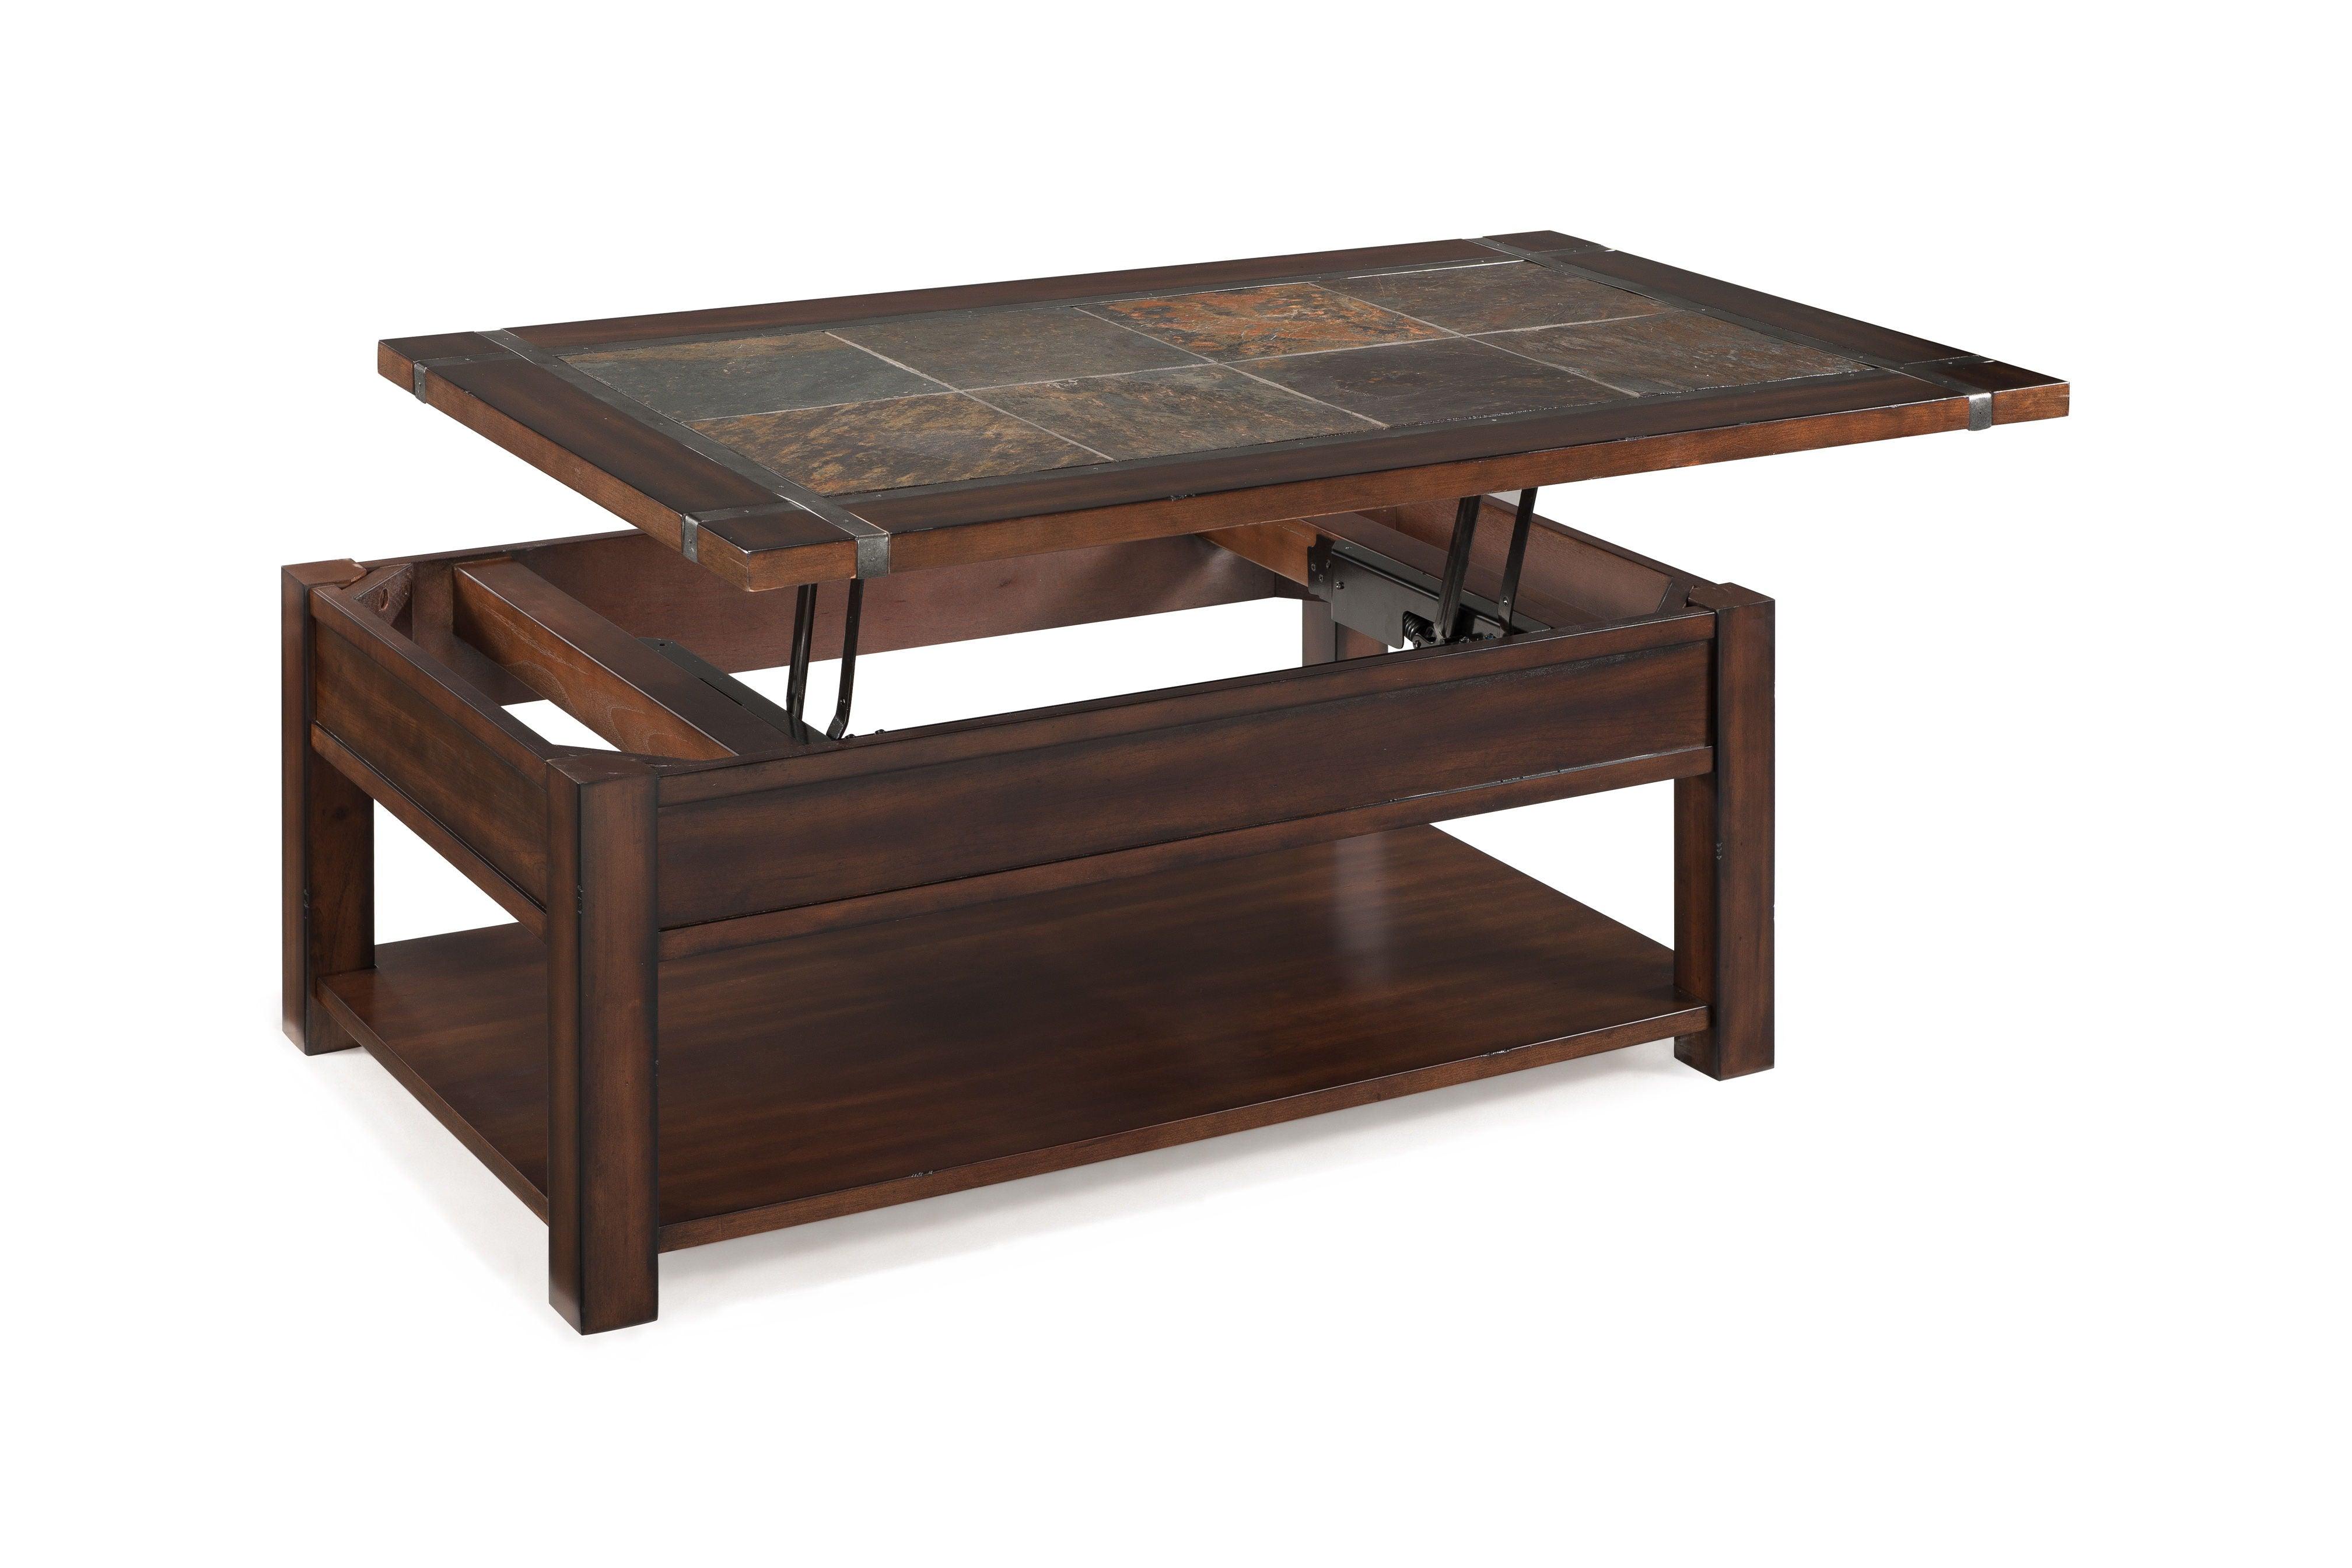 Magnussen Furniture - Roanoke - Rectangular Lift Top Cocktail Table (With Casters) - Cherry And Slate - 5th Avenue Furniture